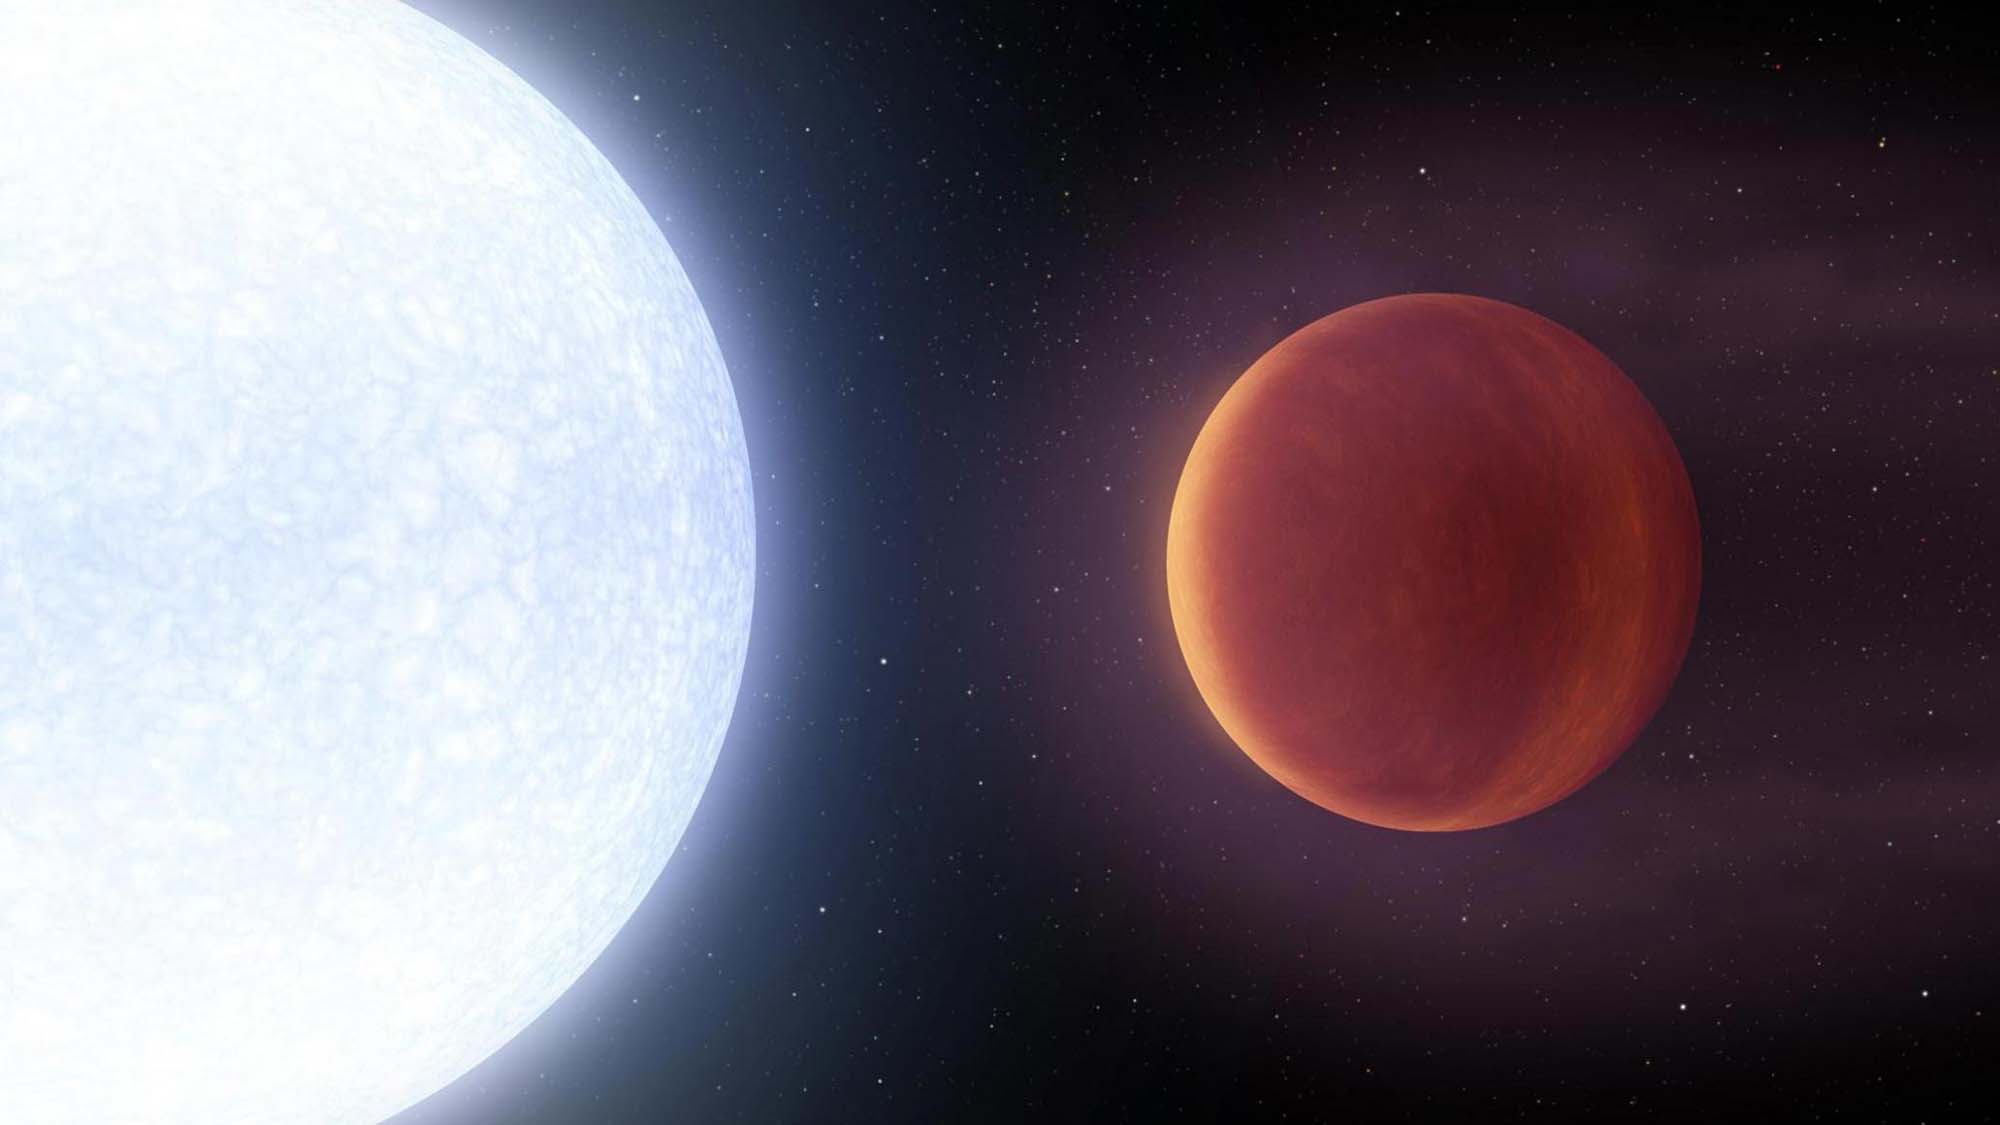 A gas giant orbiting very close to a bright blue star